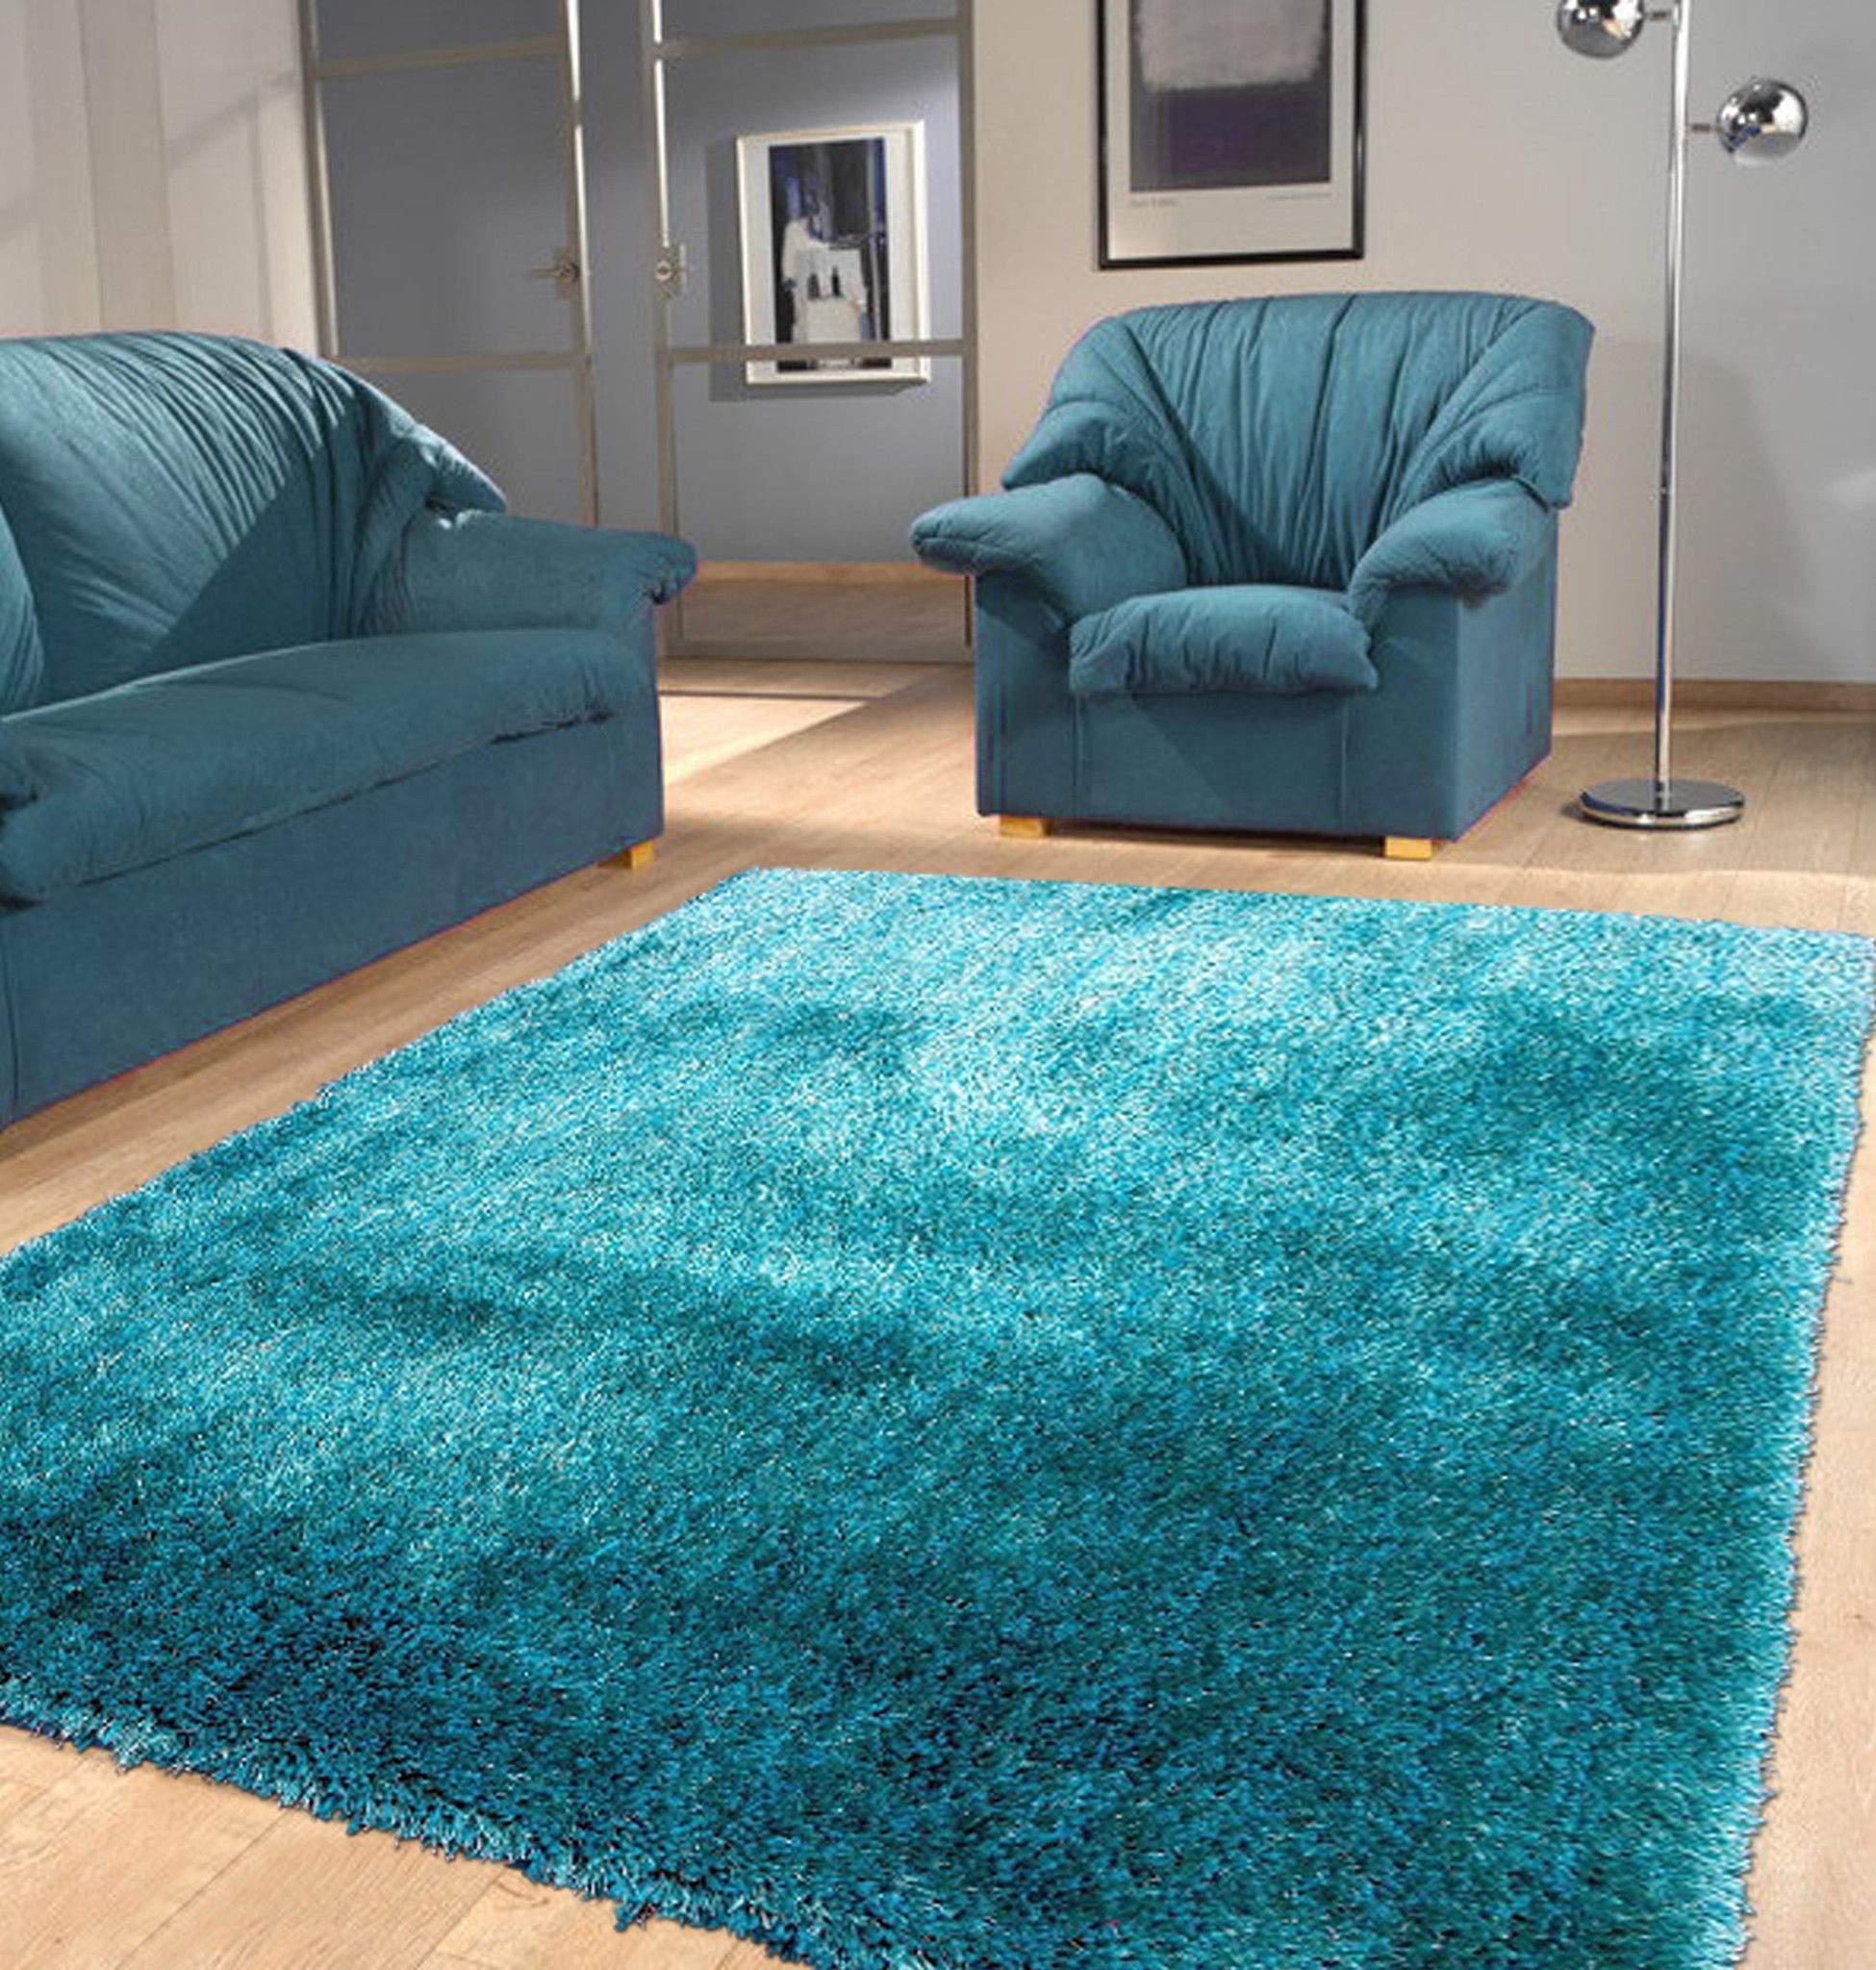 Turquoise Rug Living Room
 Living Room Layout And Decor Turquoise Rug White Gray Rugs